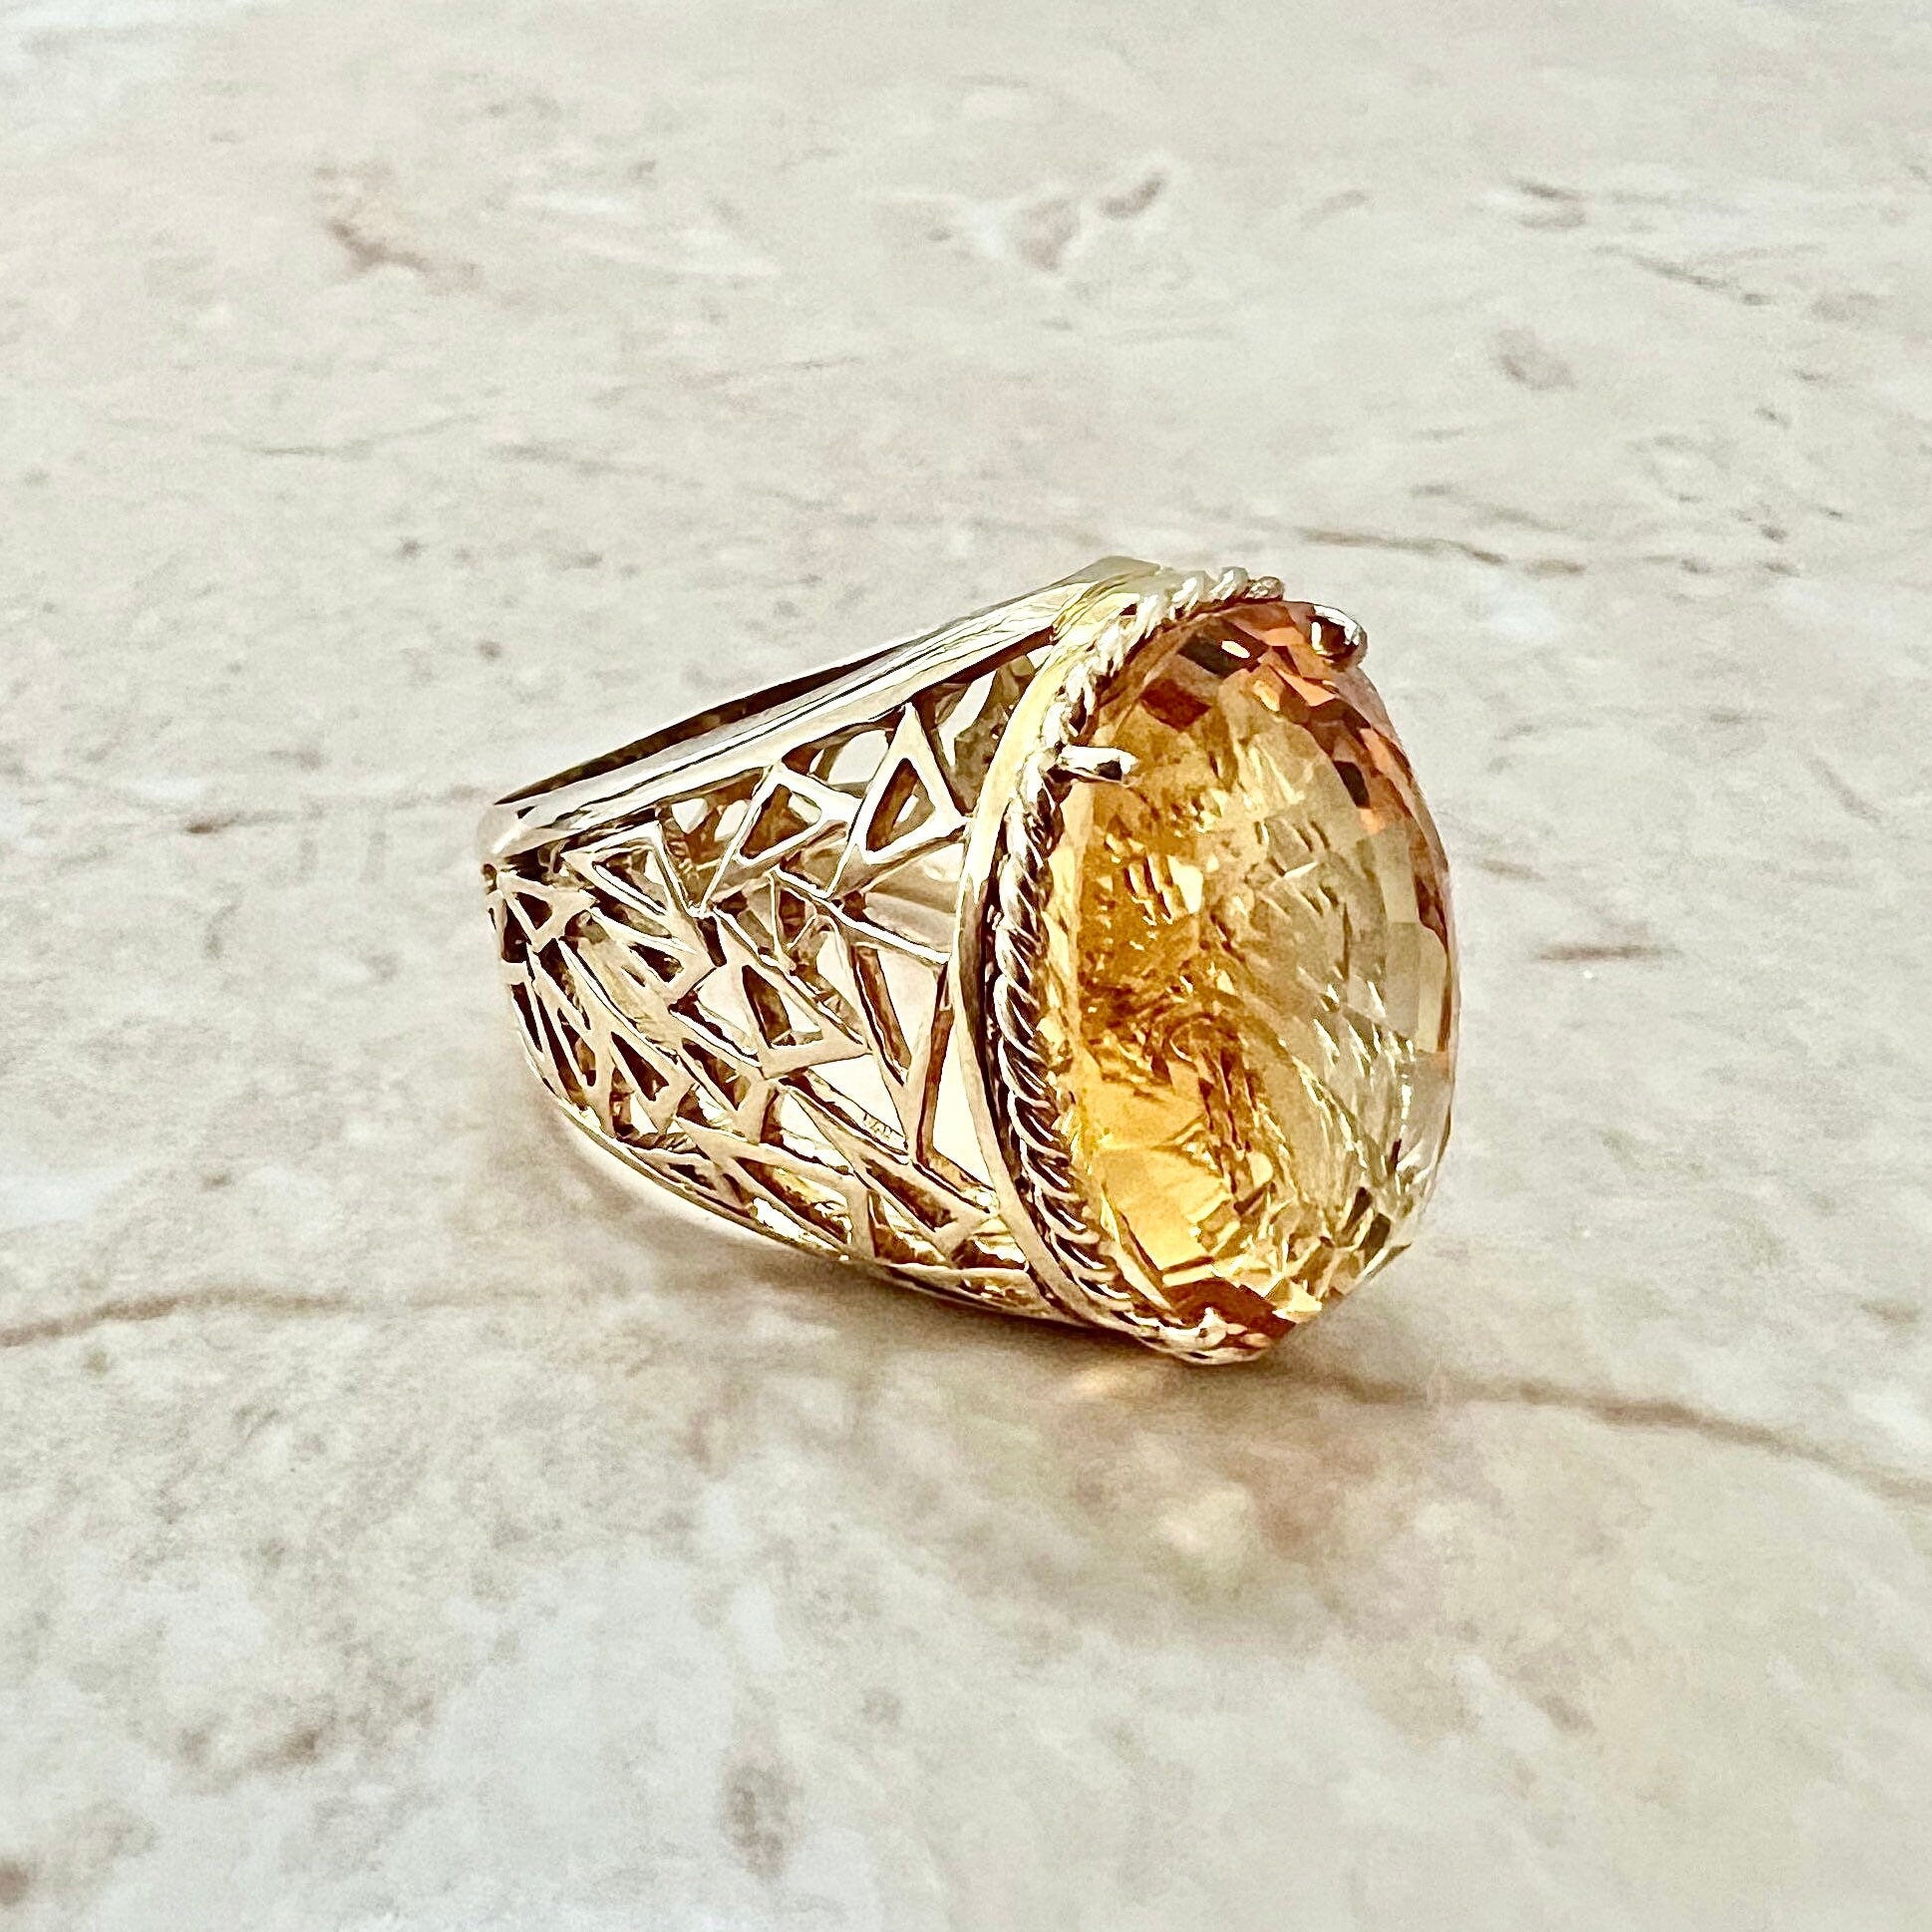 Vintage 14K Citrine Cocktail Ring In Yellow Gold - Chunky Yellow Gold Citrine Ring - Citrine Solitaire Ring-Birthday Gift-Best Gifts For Her